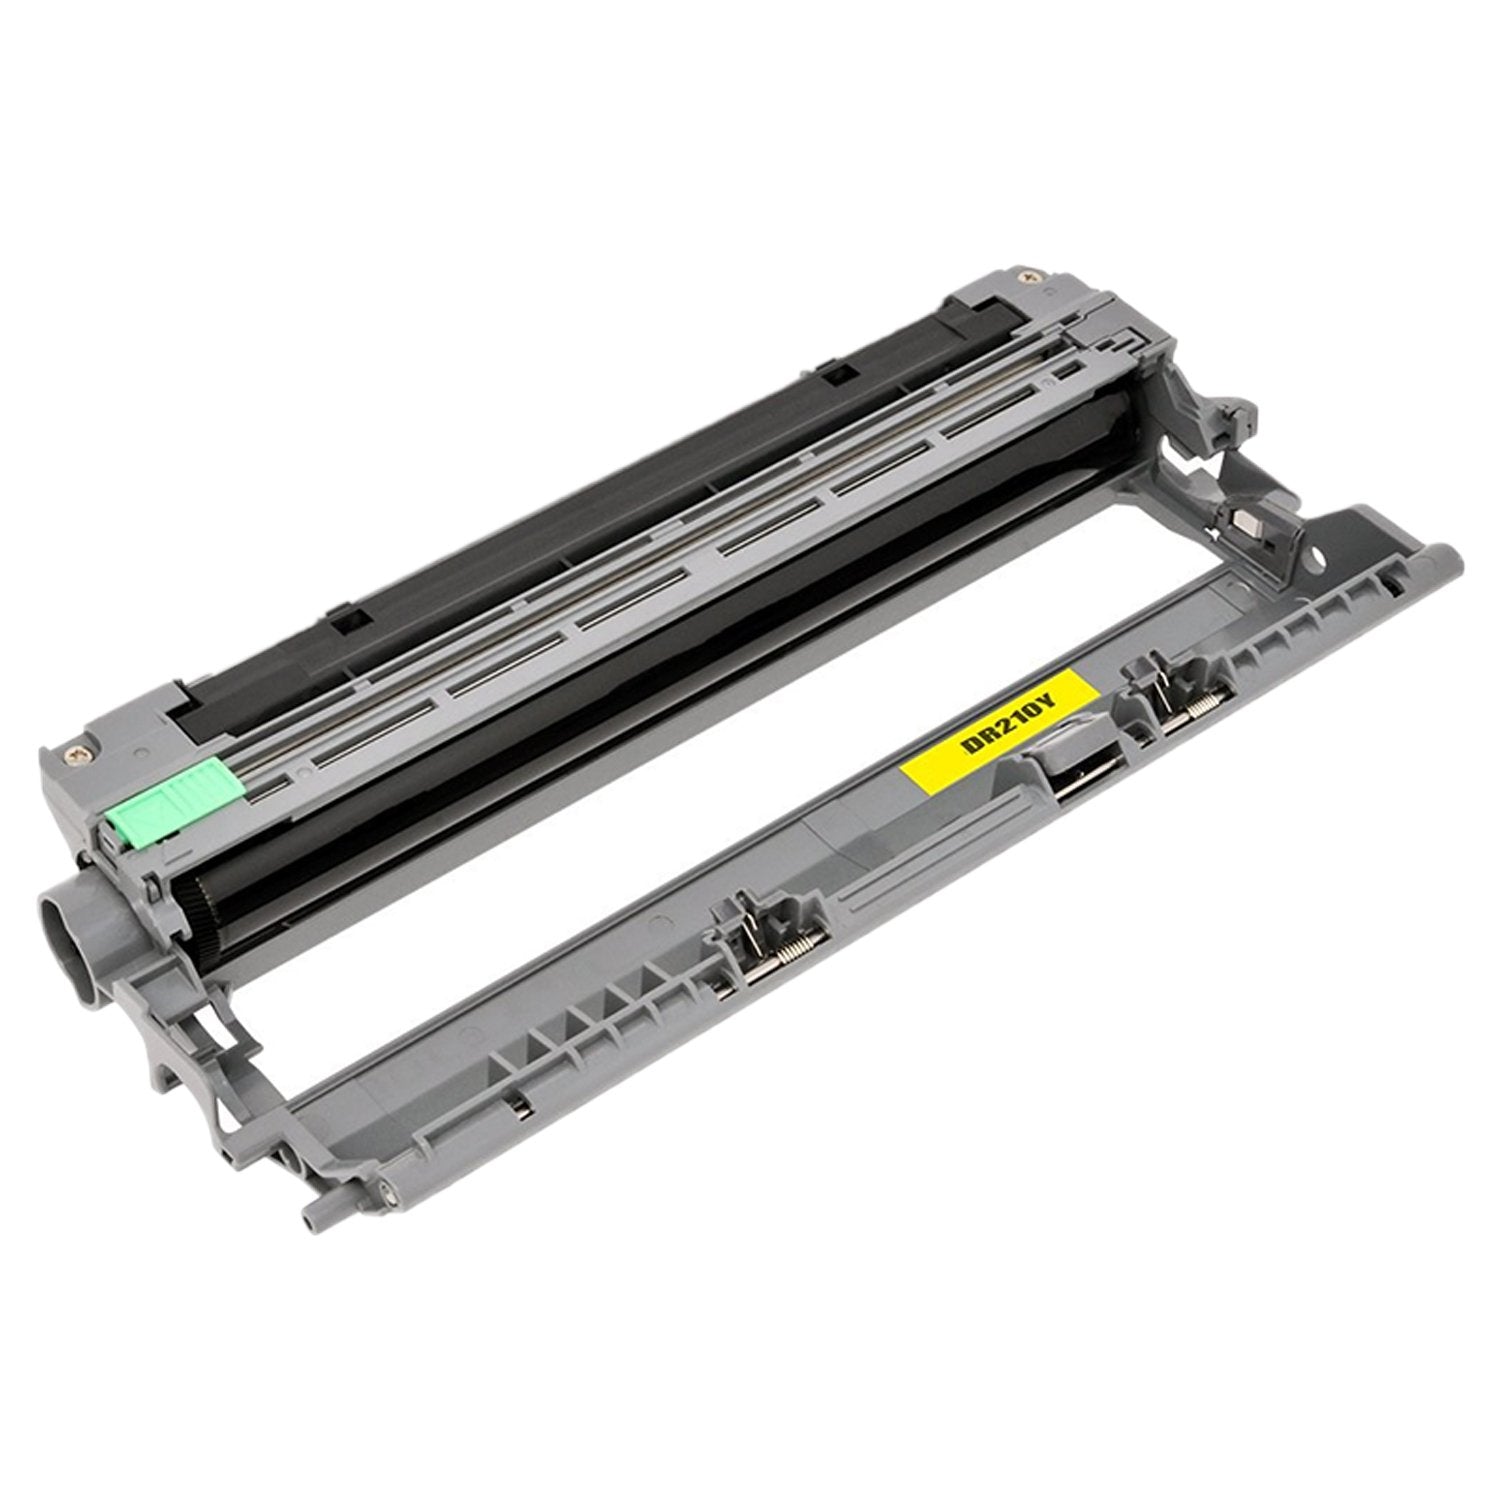 Absolute Toner Compatible Brother DR210 Yellow Drum Unit Toner Cartridge | Absolute Toner Brother Toner Cartridges